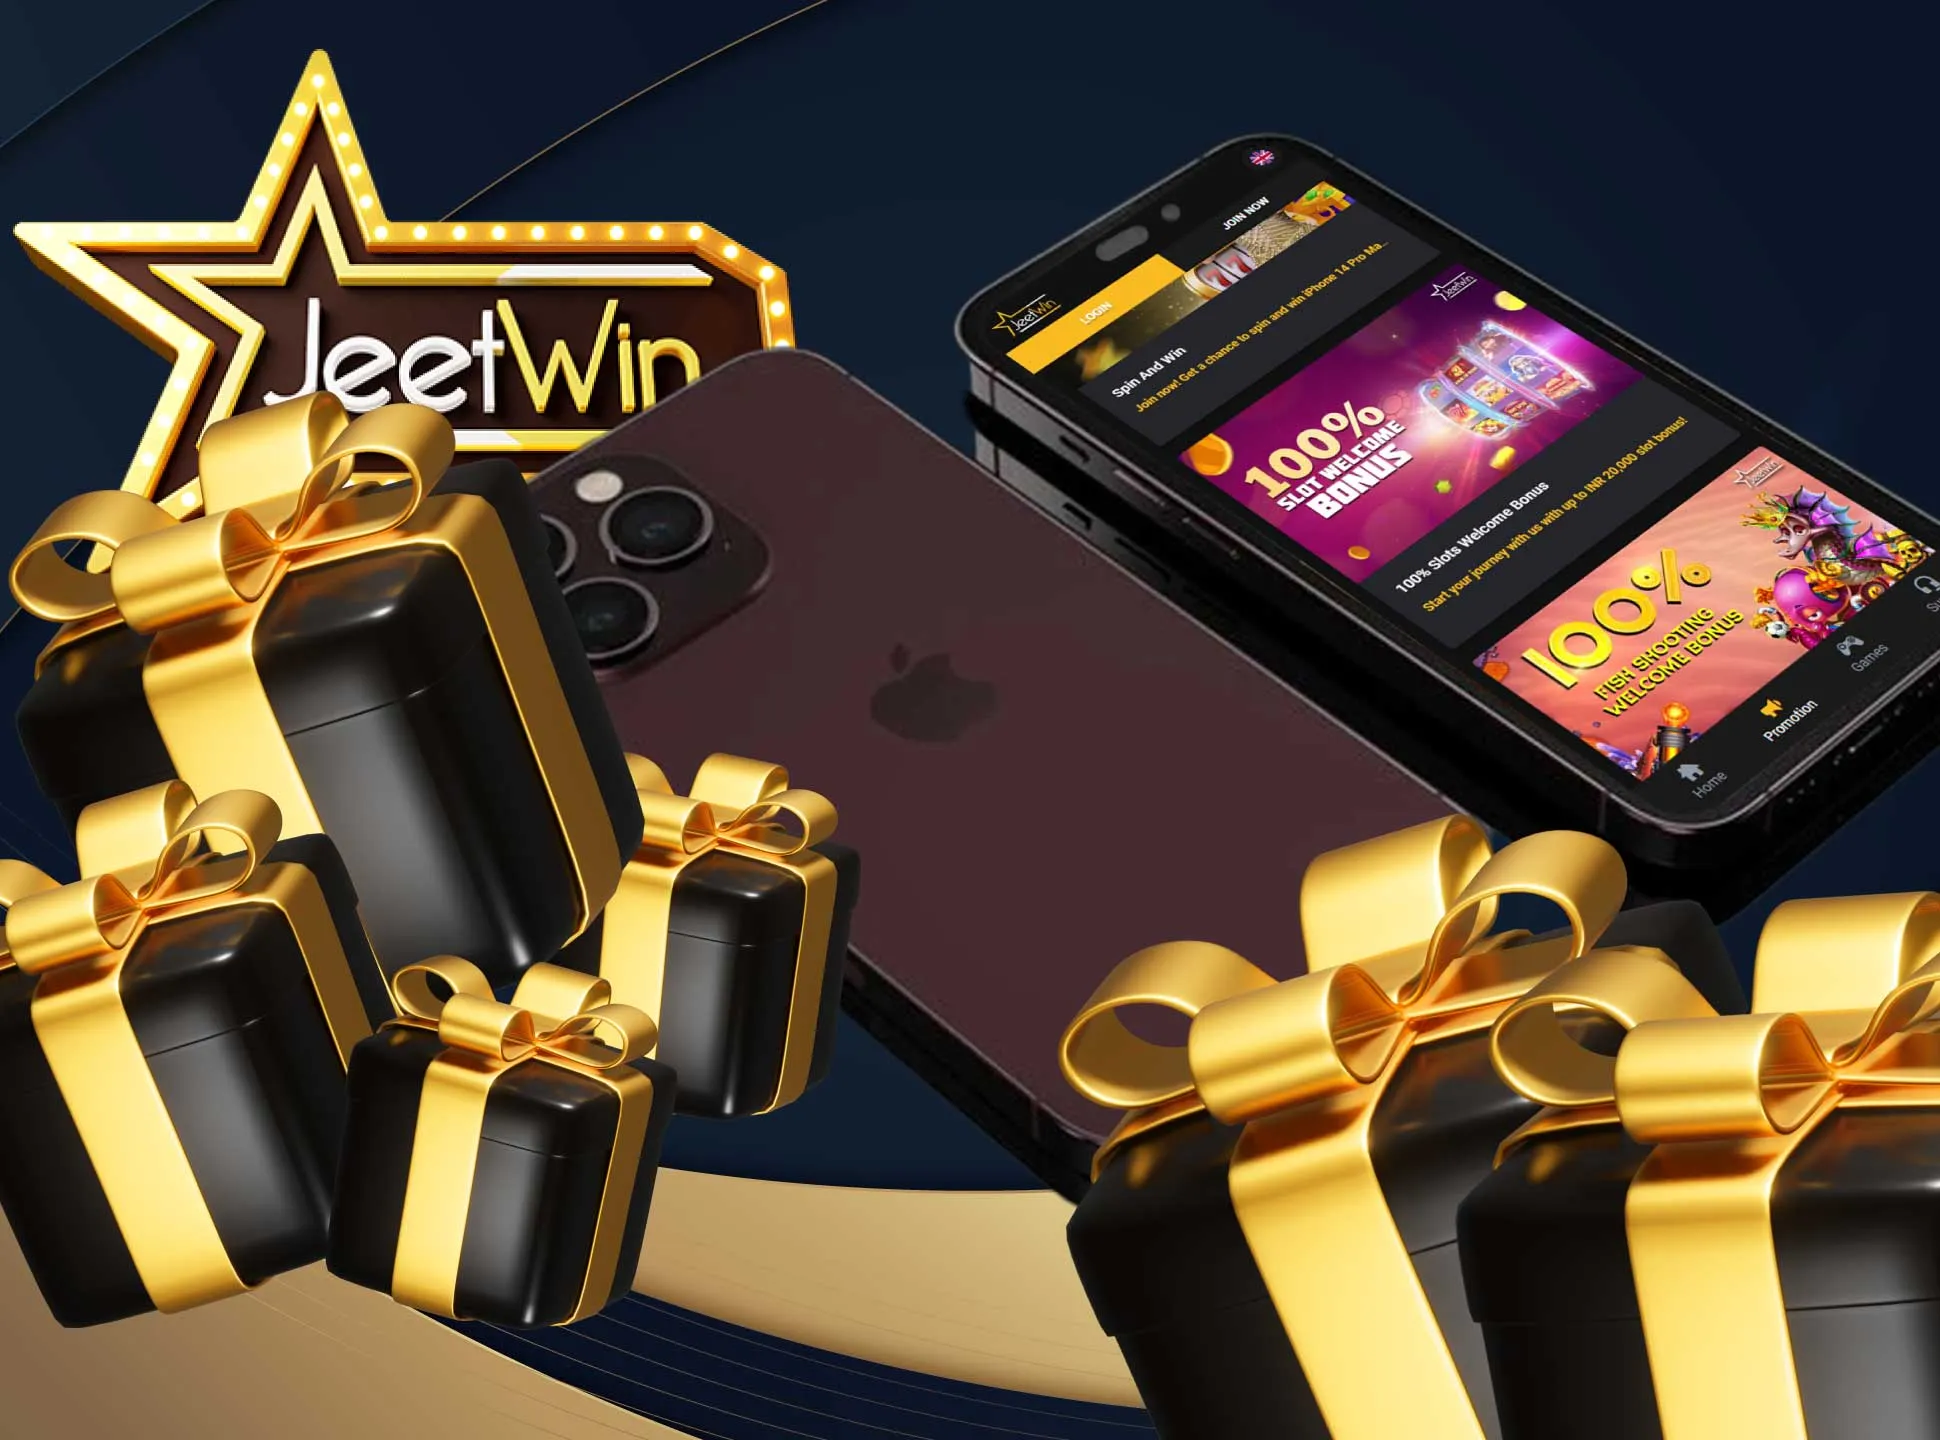 Jeetwin offers a welcome bonus for new bettors.